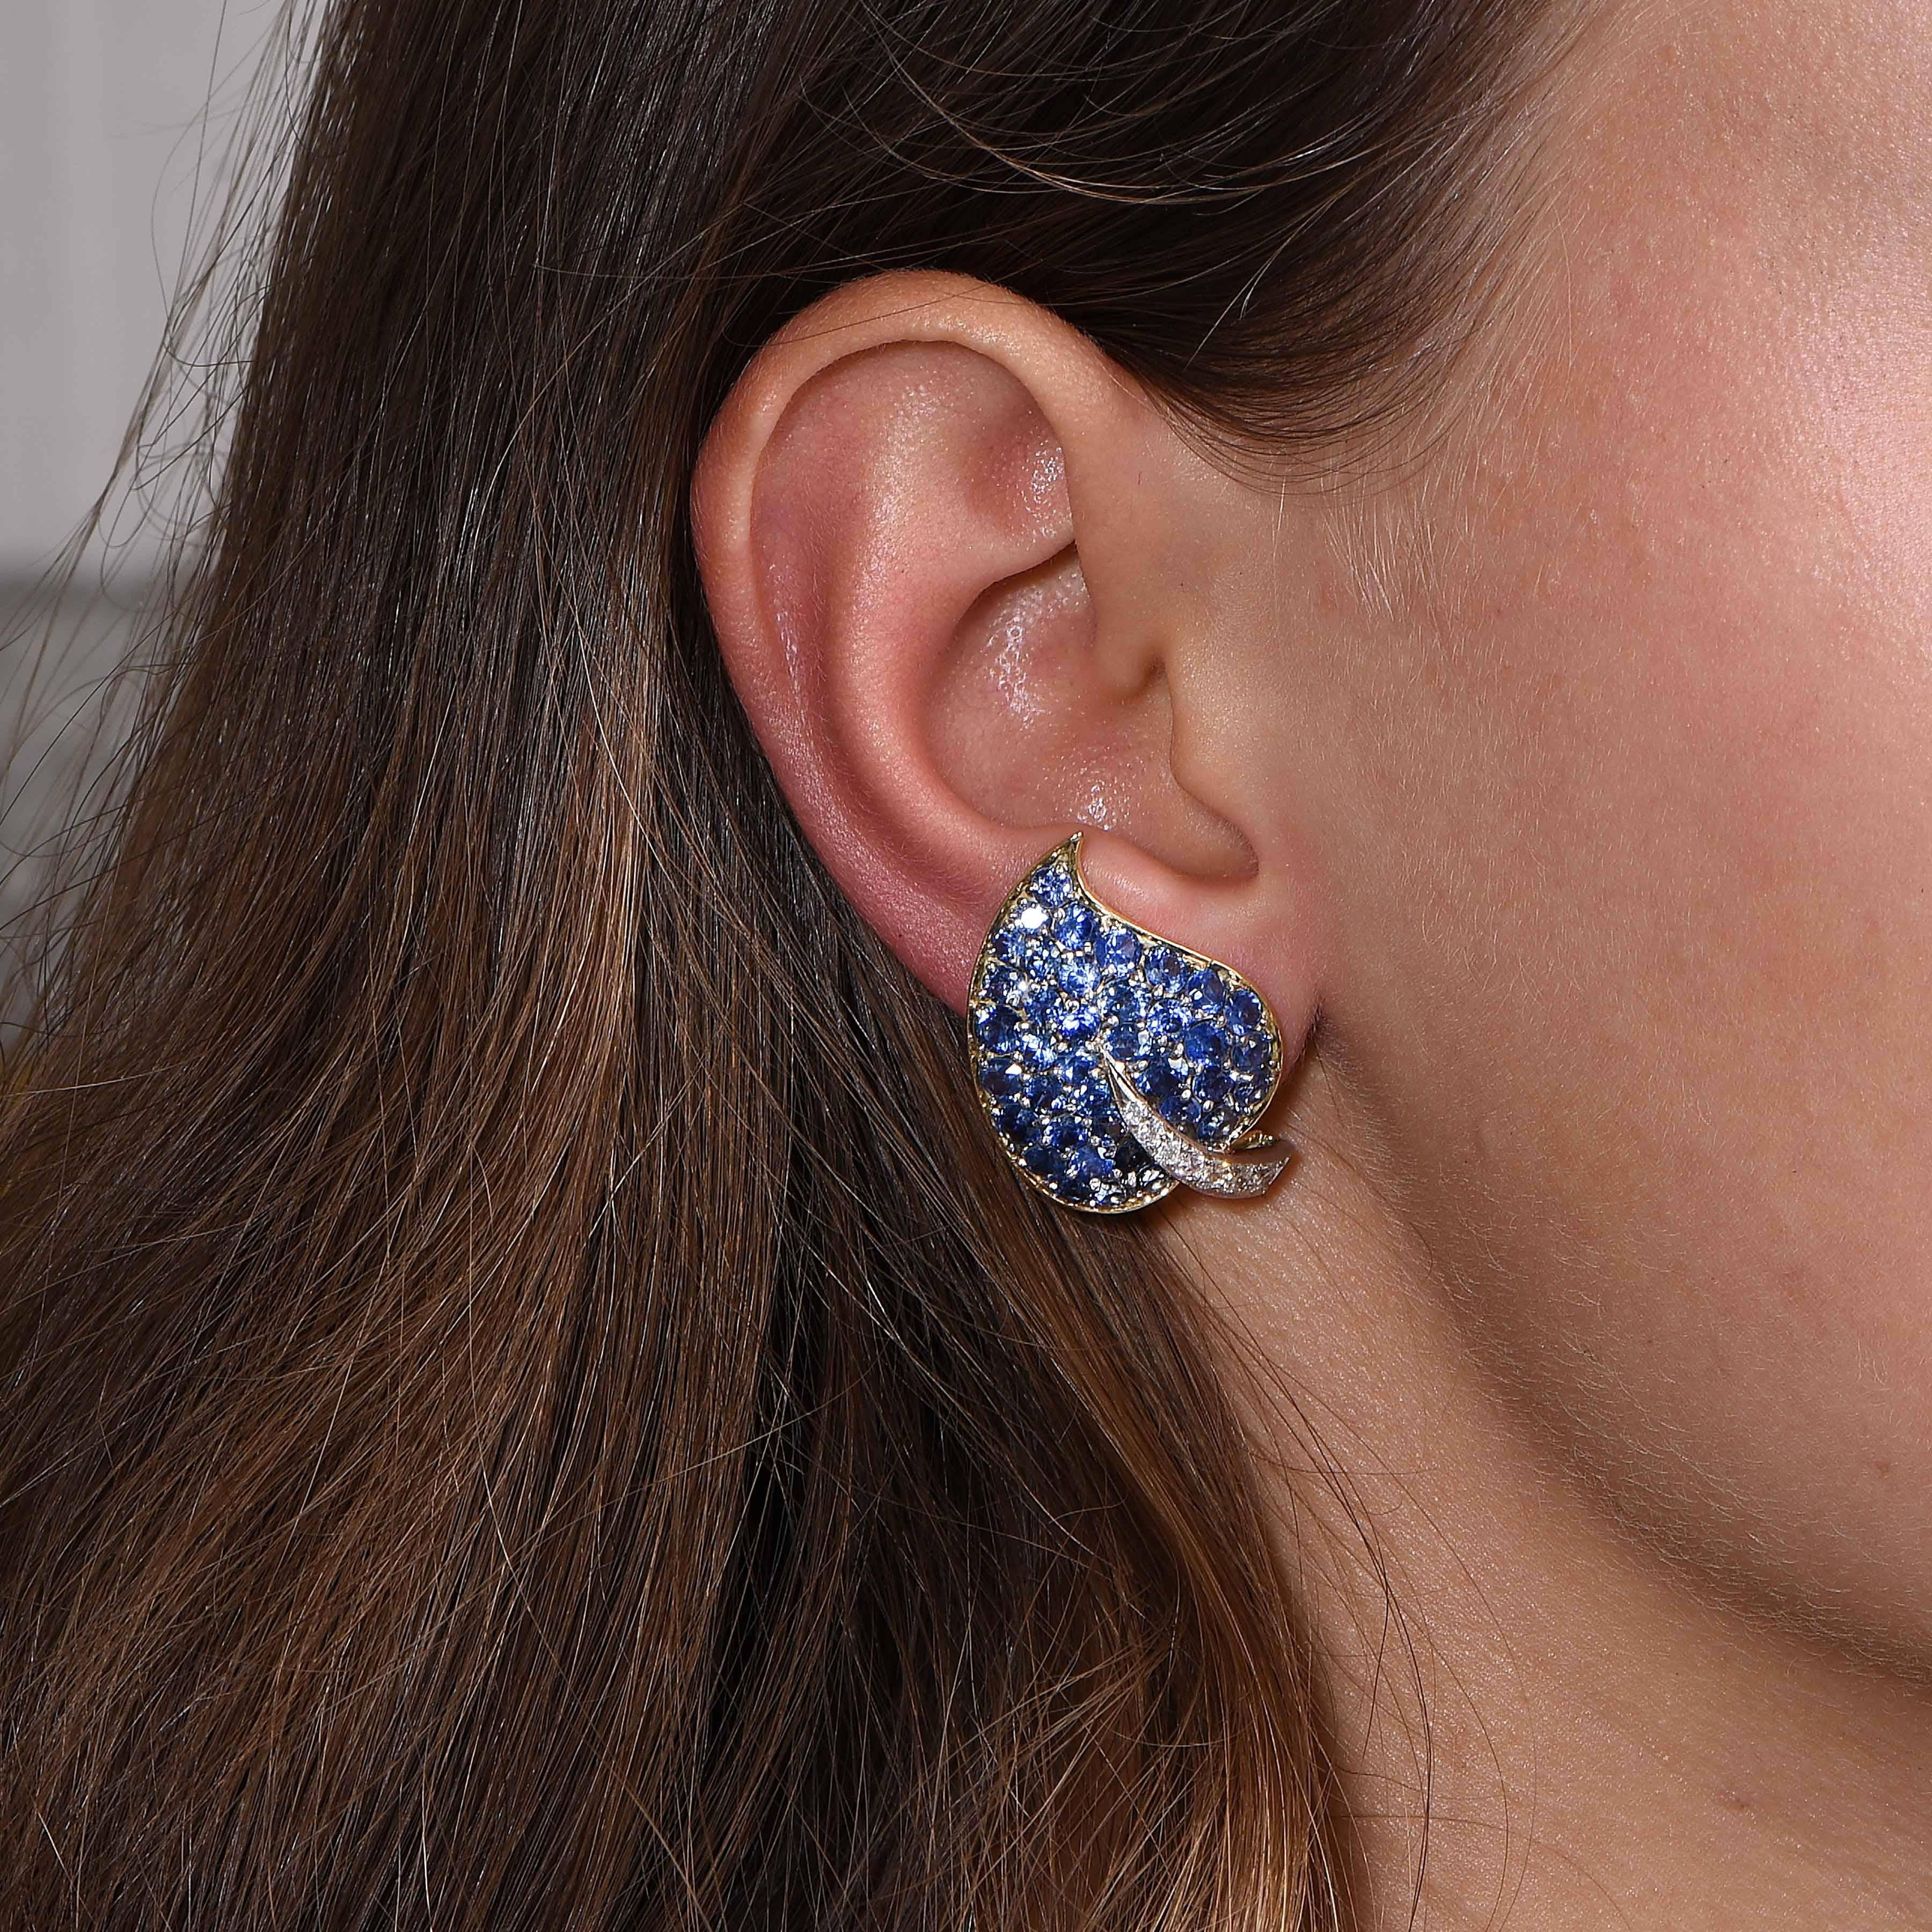 Sapphire and Diamond Van Cleef and Arpels leaf design earrings featuring 56 round cut blue sapphires with an estimated total weight of 5.6 carats and 14 transitional cut diamonds with an estimated total weight of .45 carats set in 18 karat yellow